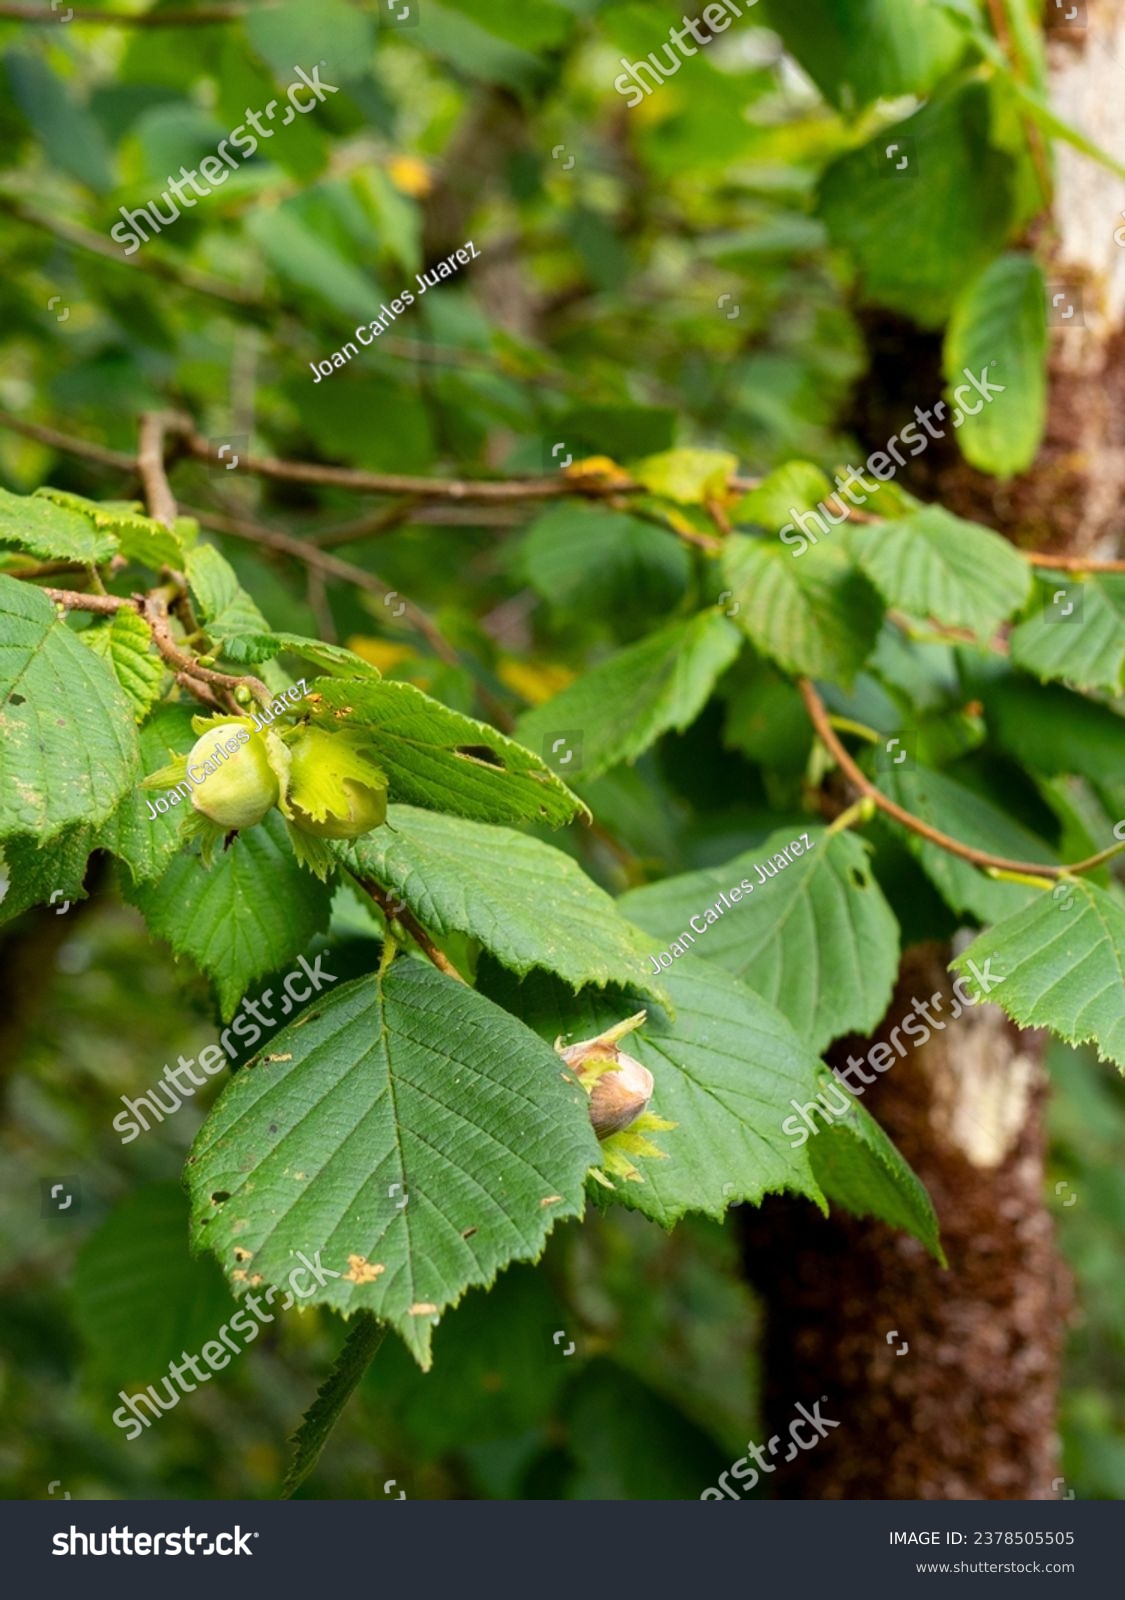 detail of hazelnuts hanging on a branch of a common hazel tree (Corylus avellana) with blurred background #2378505505